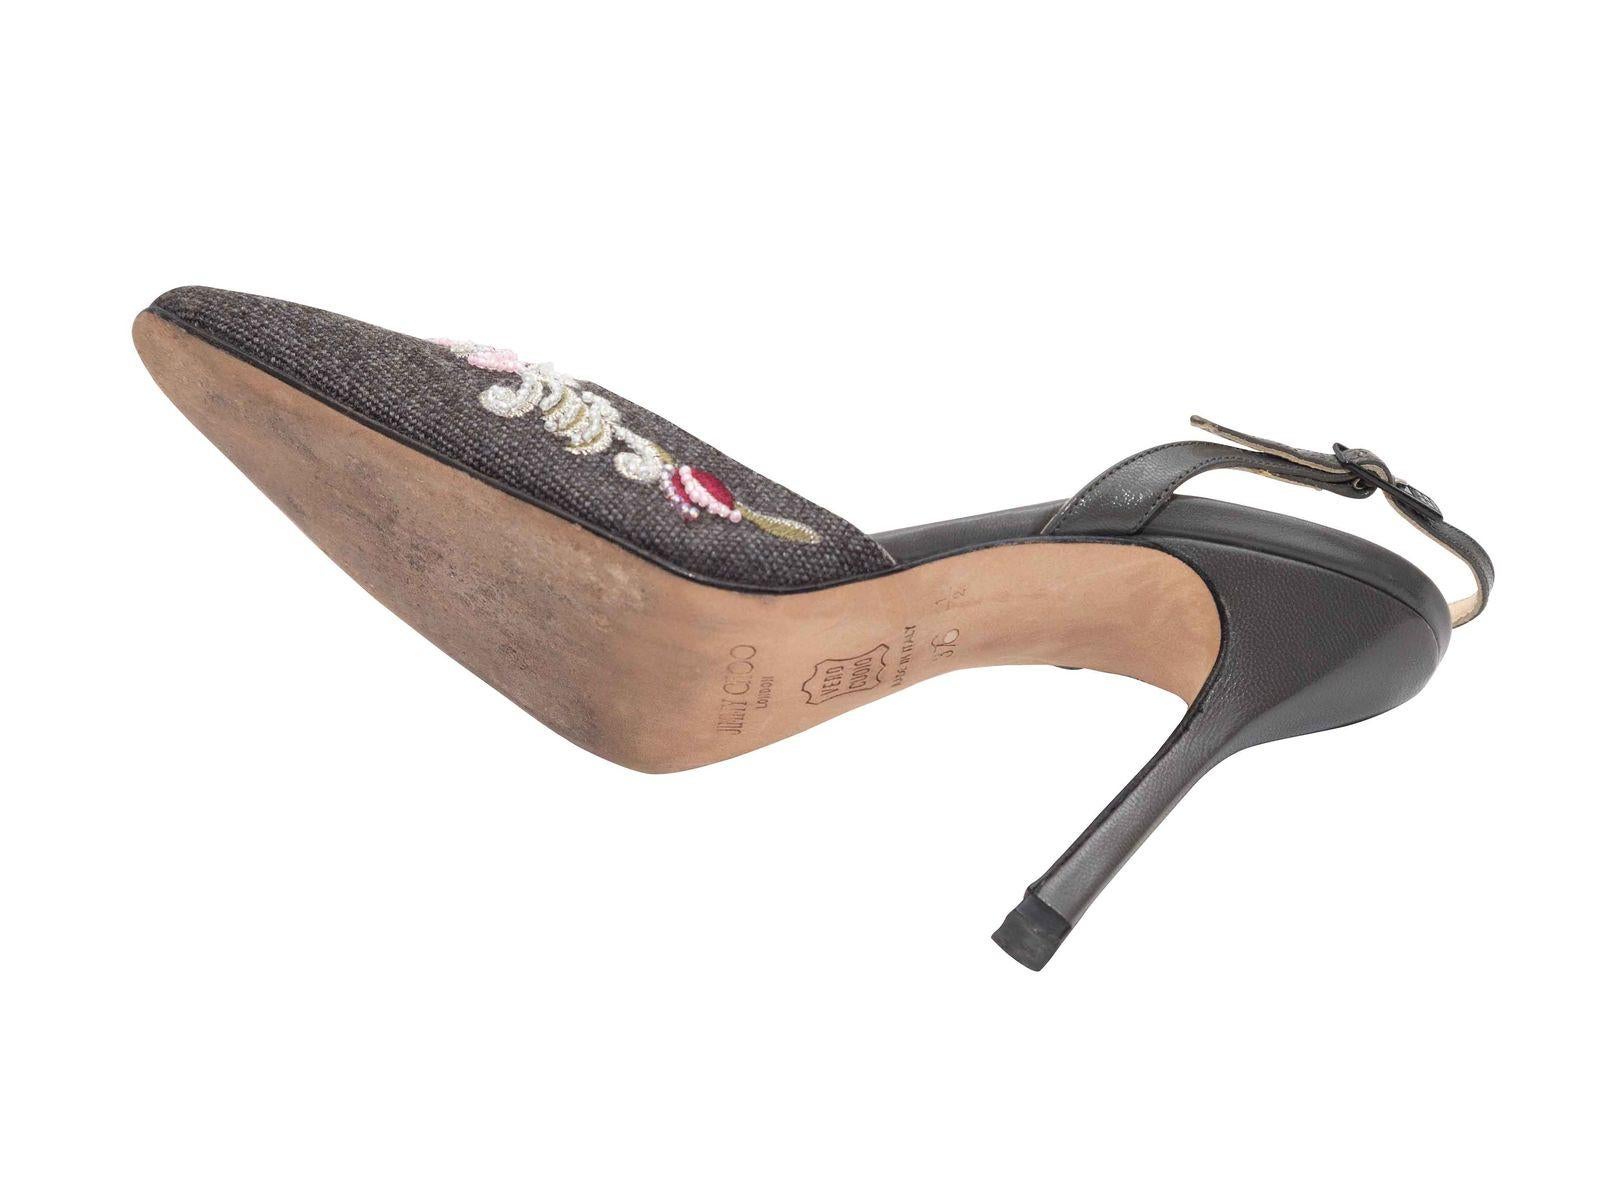 Product Details: Grey wool sling back heels by Jimmy Choo. Floral embroidery at tops. Leather-covered heels. Buckle closures at sling back straps. 3